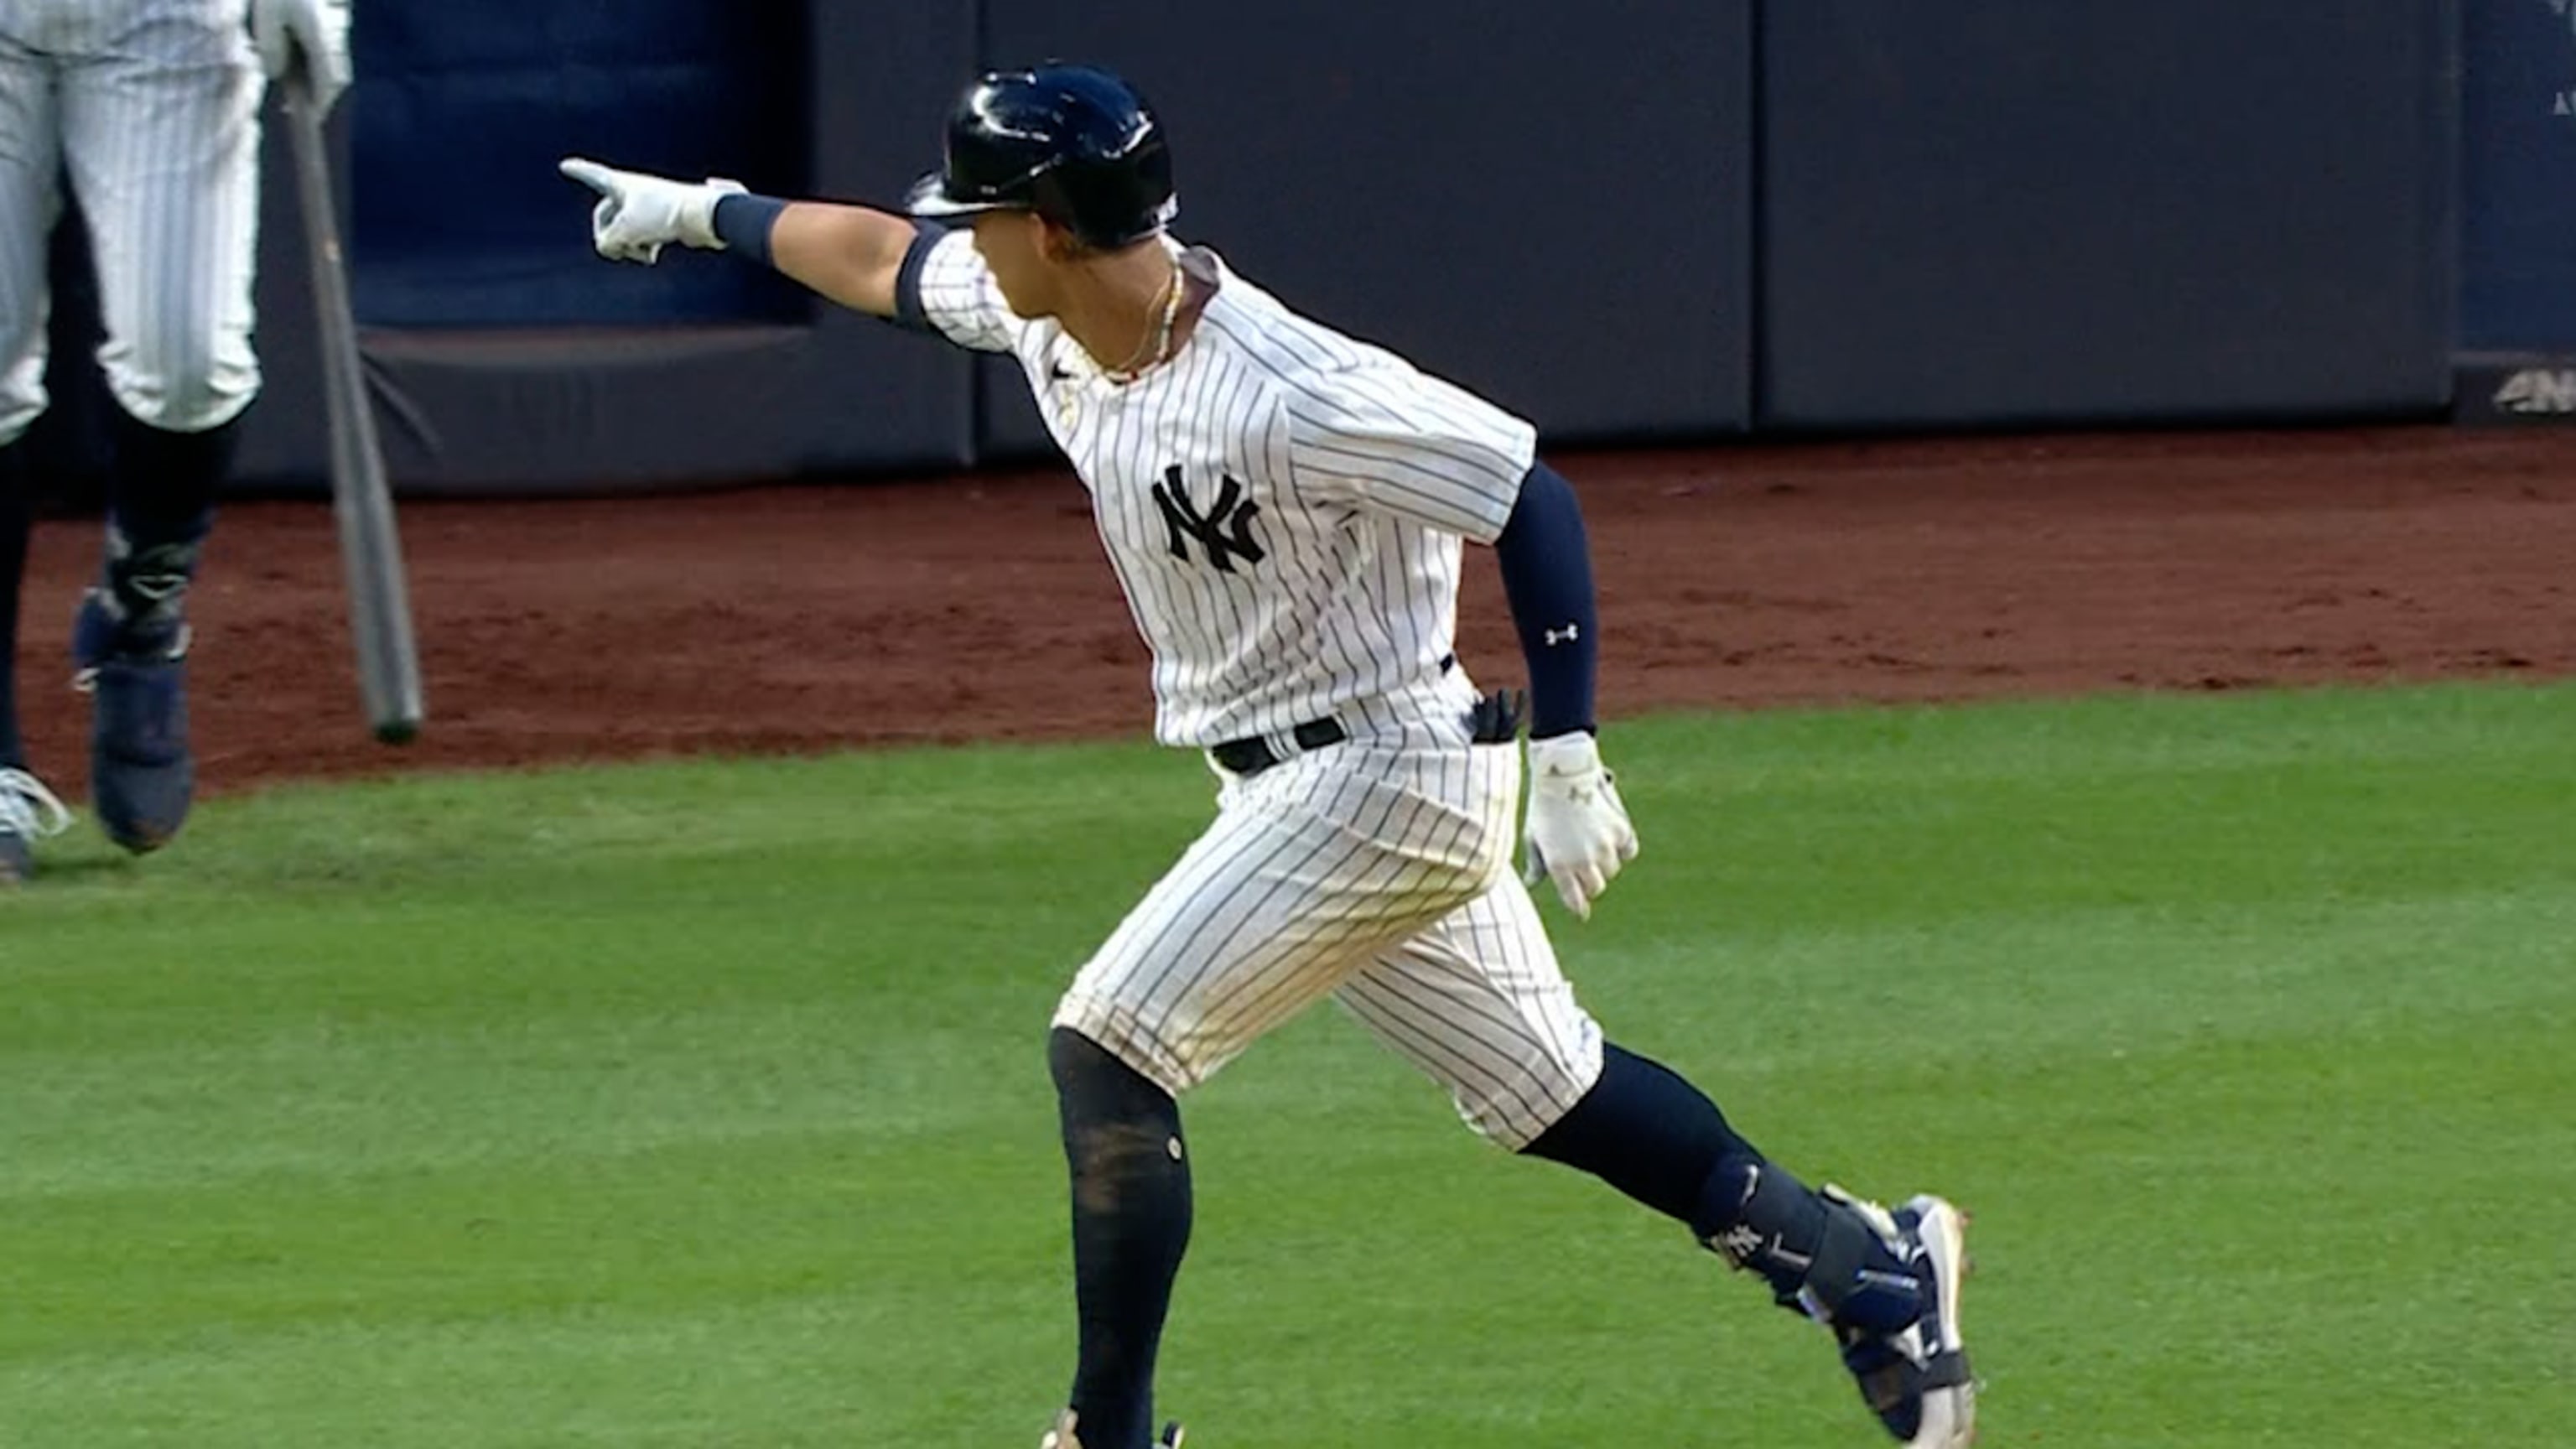 Yankees star Aaron Judge hits homer number 55, keeping pace to reach 65, Sports